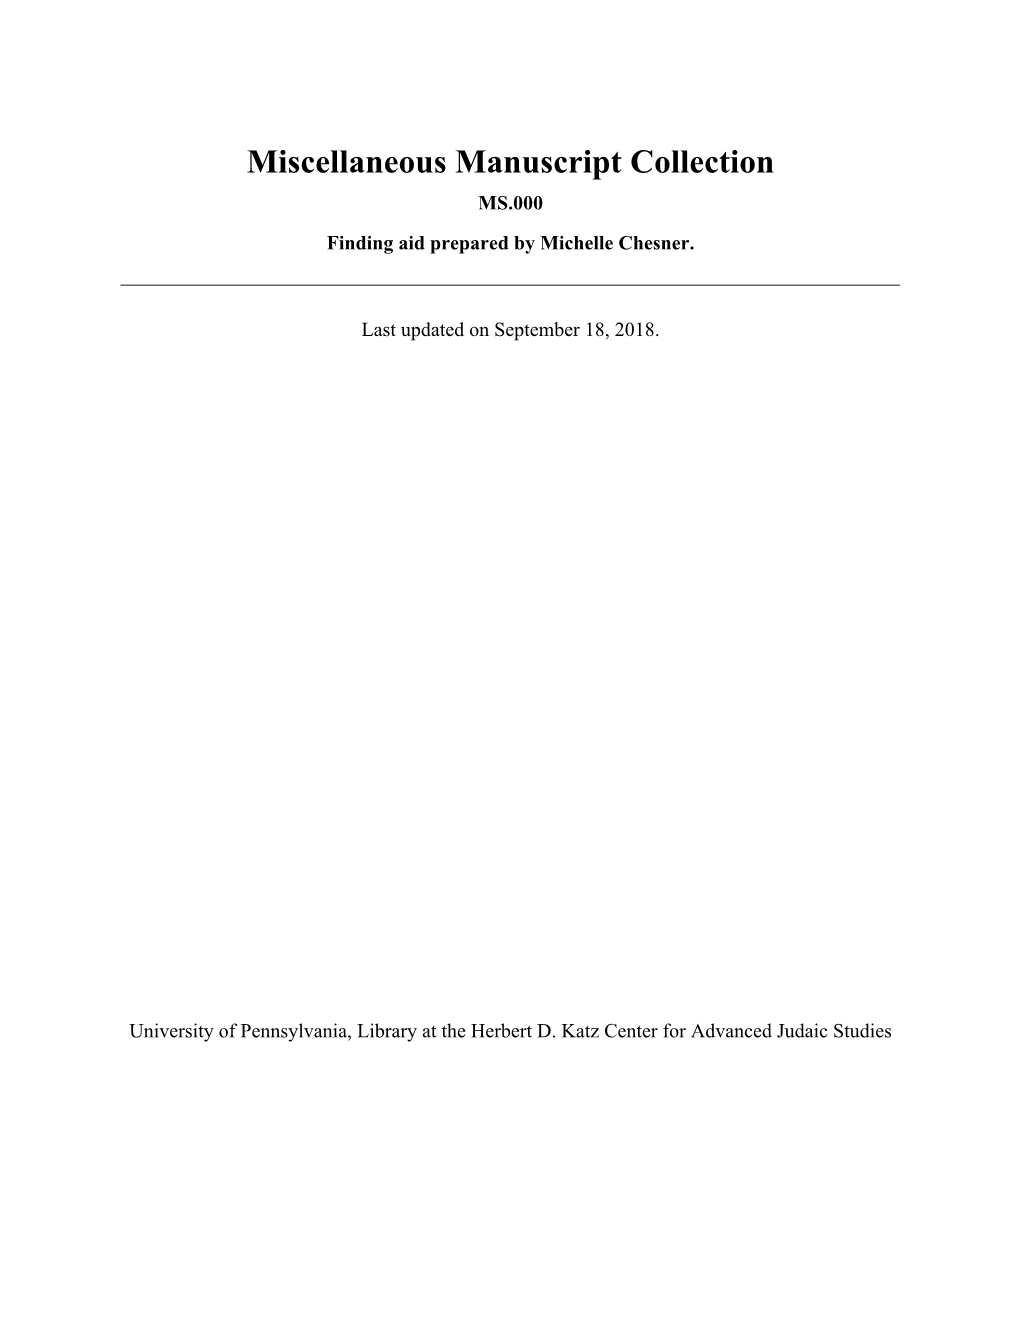 Miscellaneous Manuscript Collection MS.000 Finding Aid Prepared by Michelle Chesner